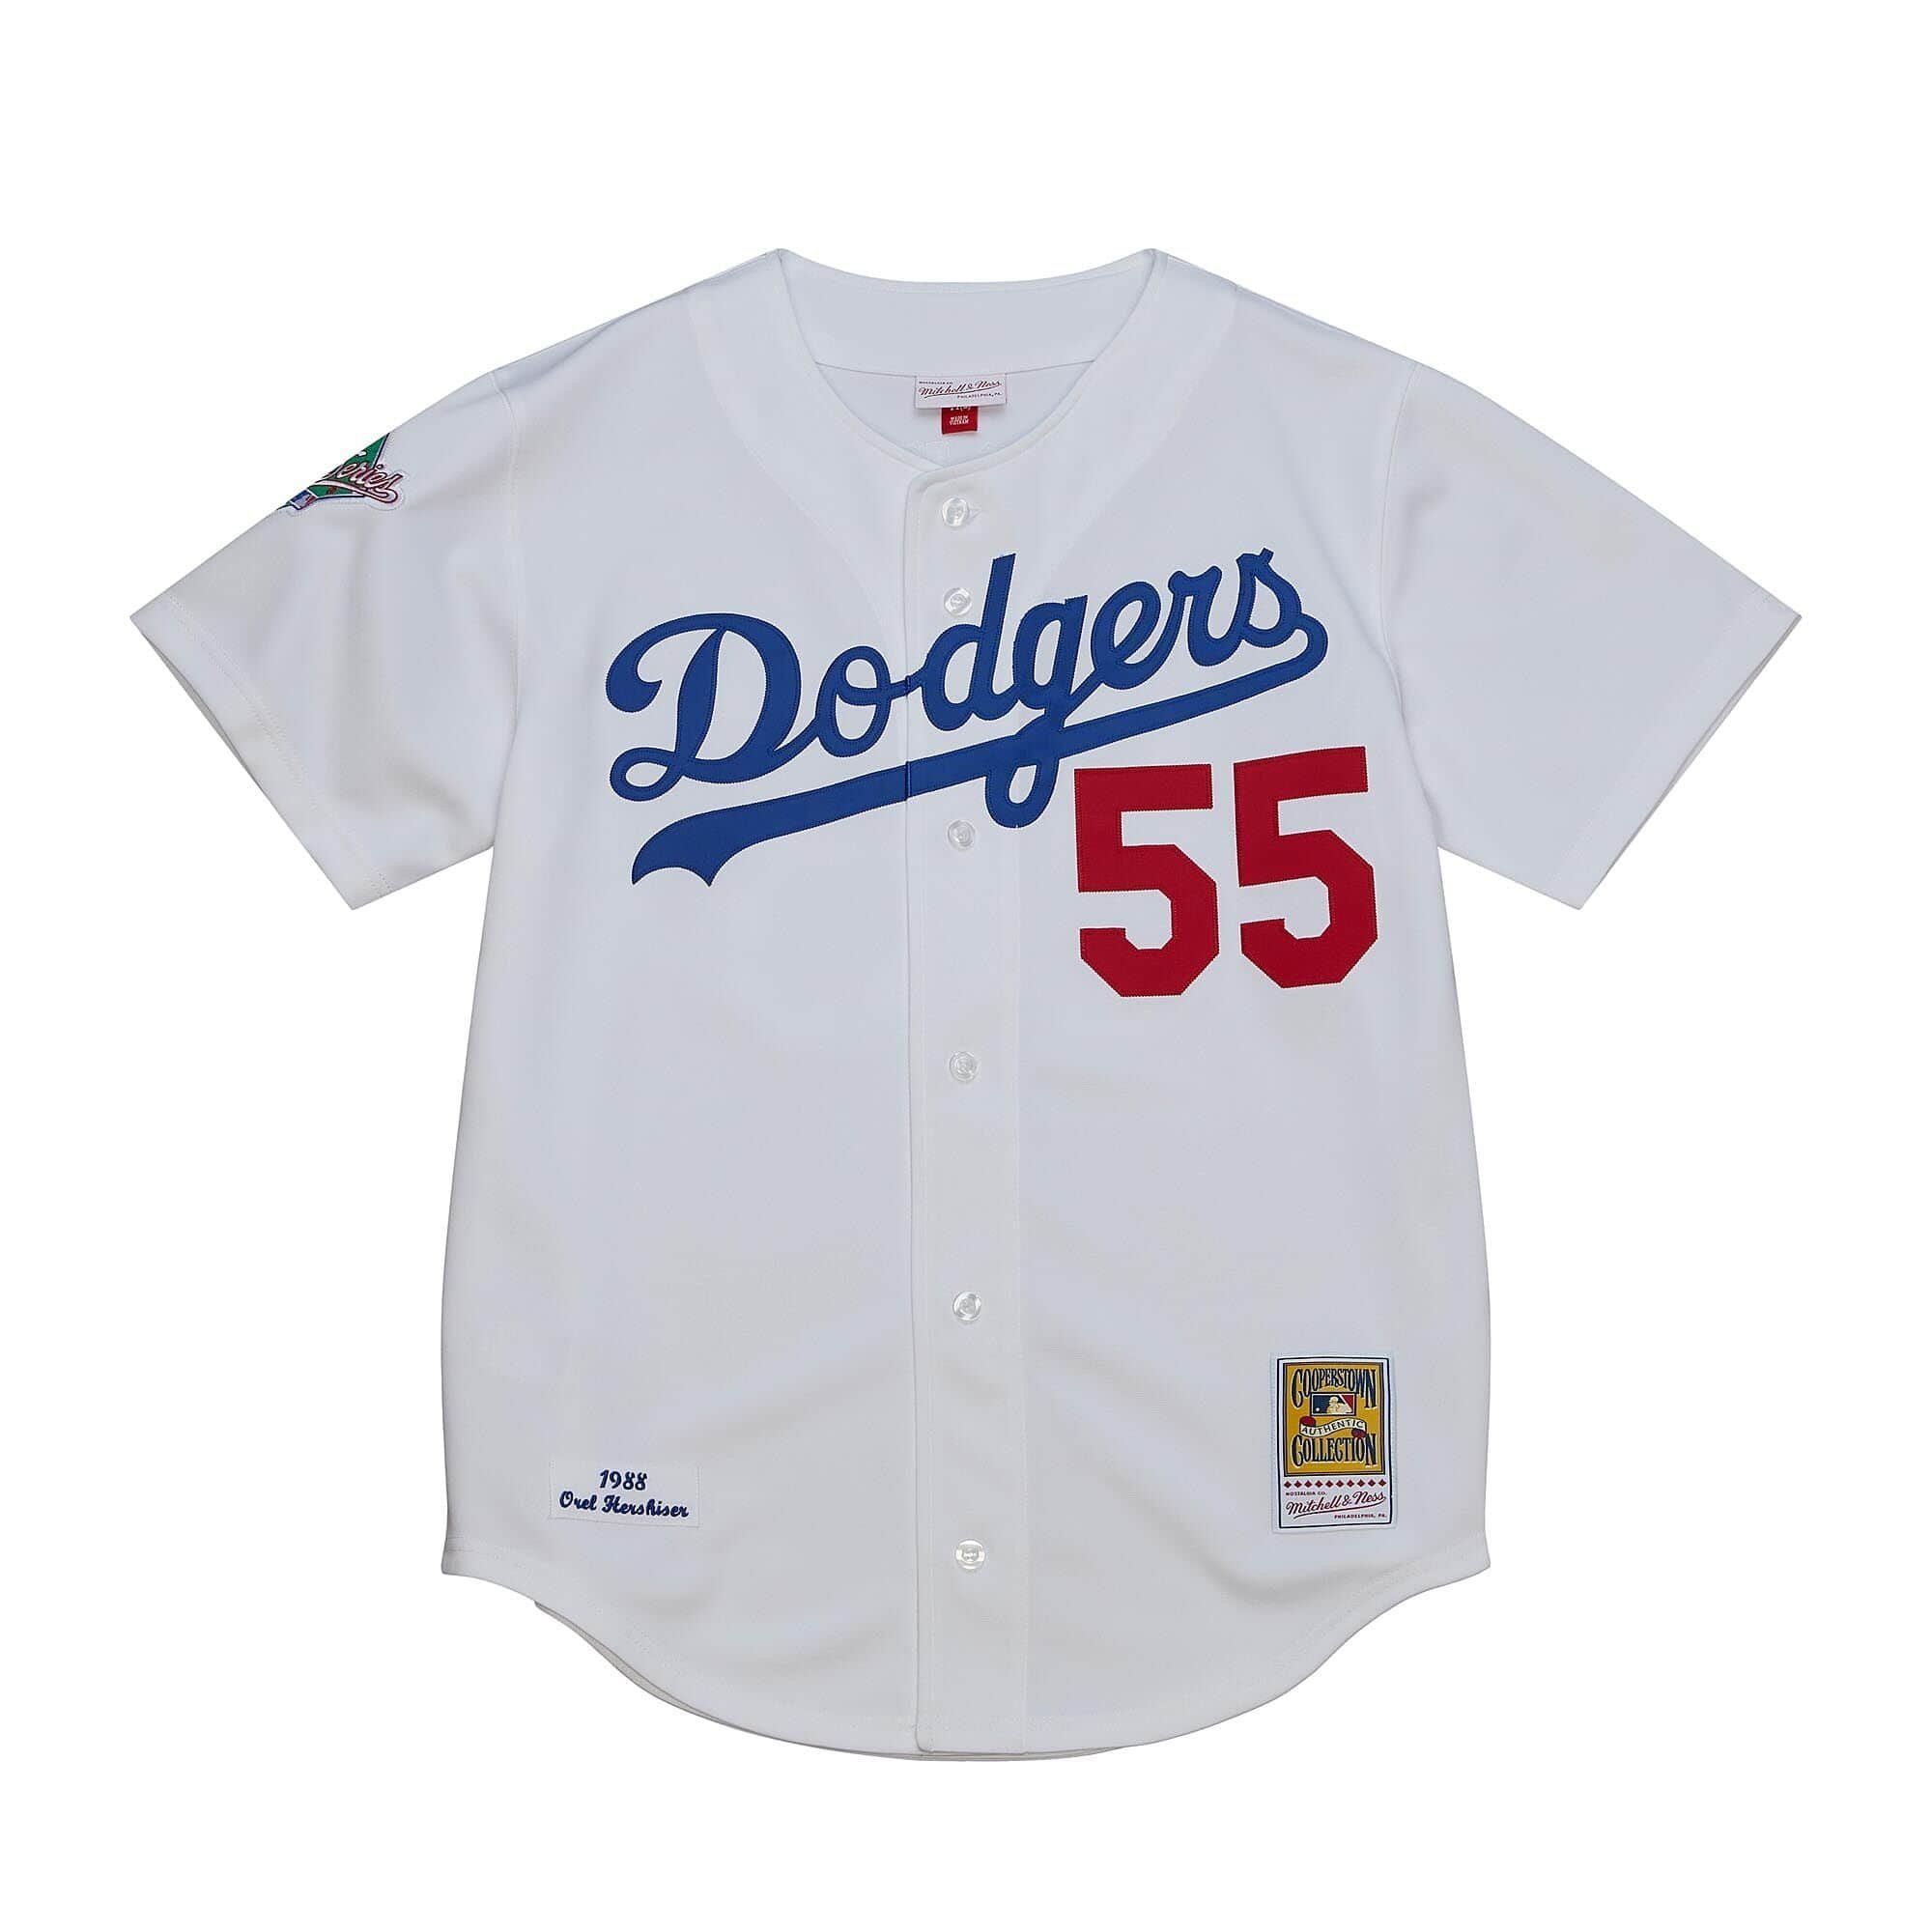 Men's Mitchell & Ness Orel Hershiser White Los Angeles Dodgers Cooperstown Collection Authentic Jersey